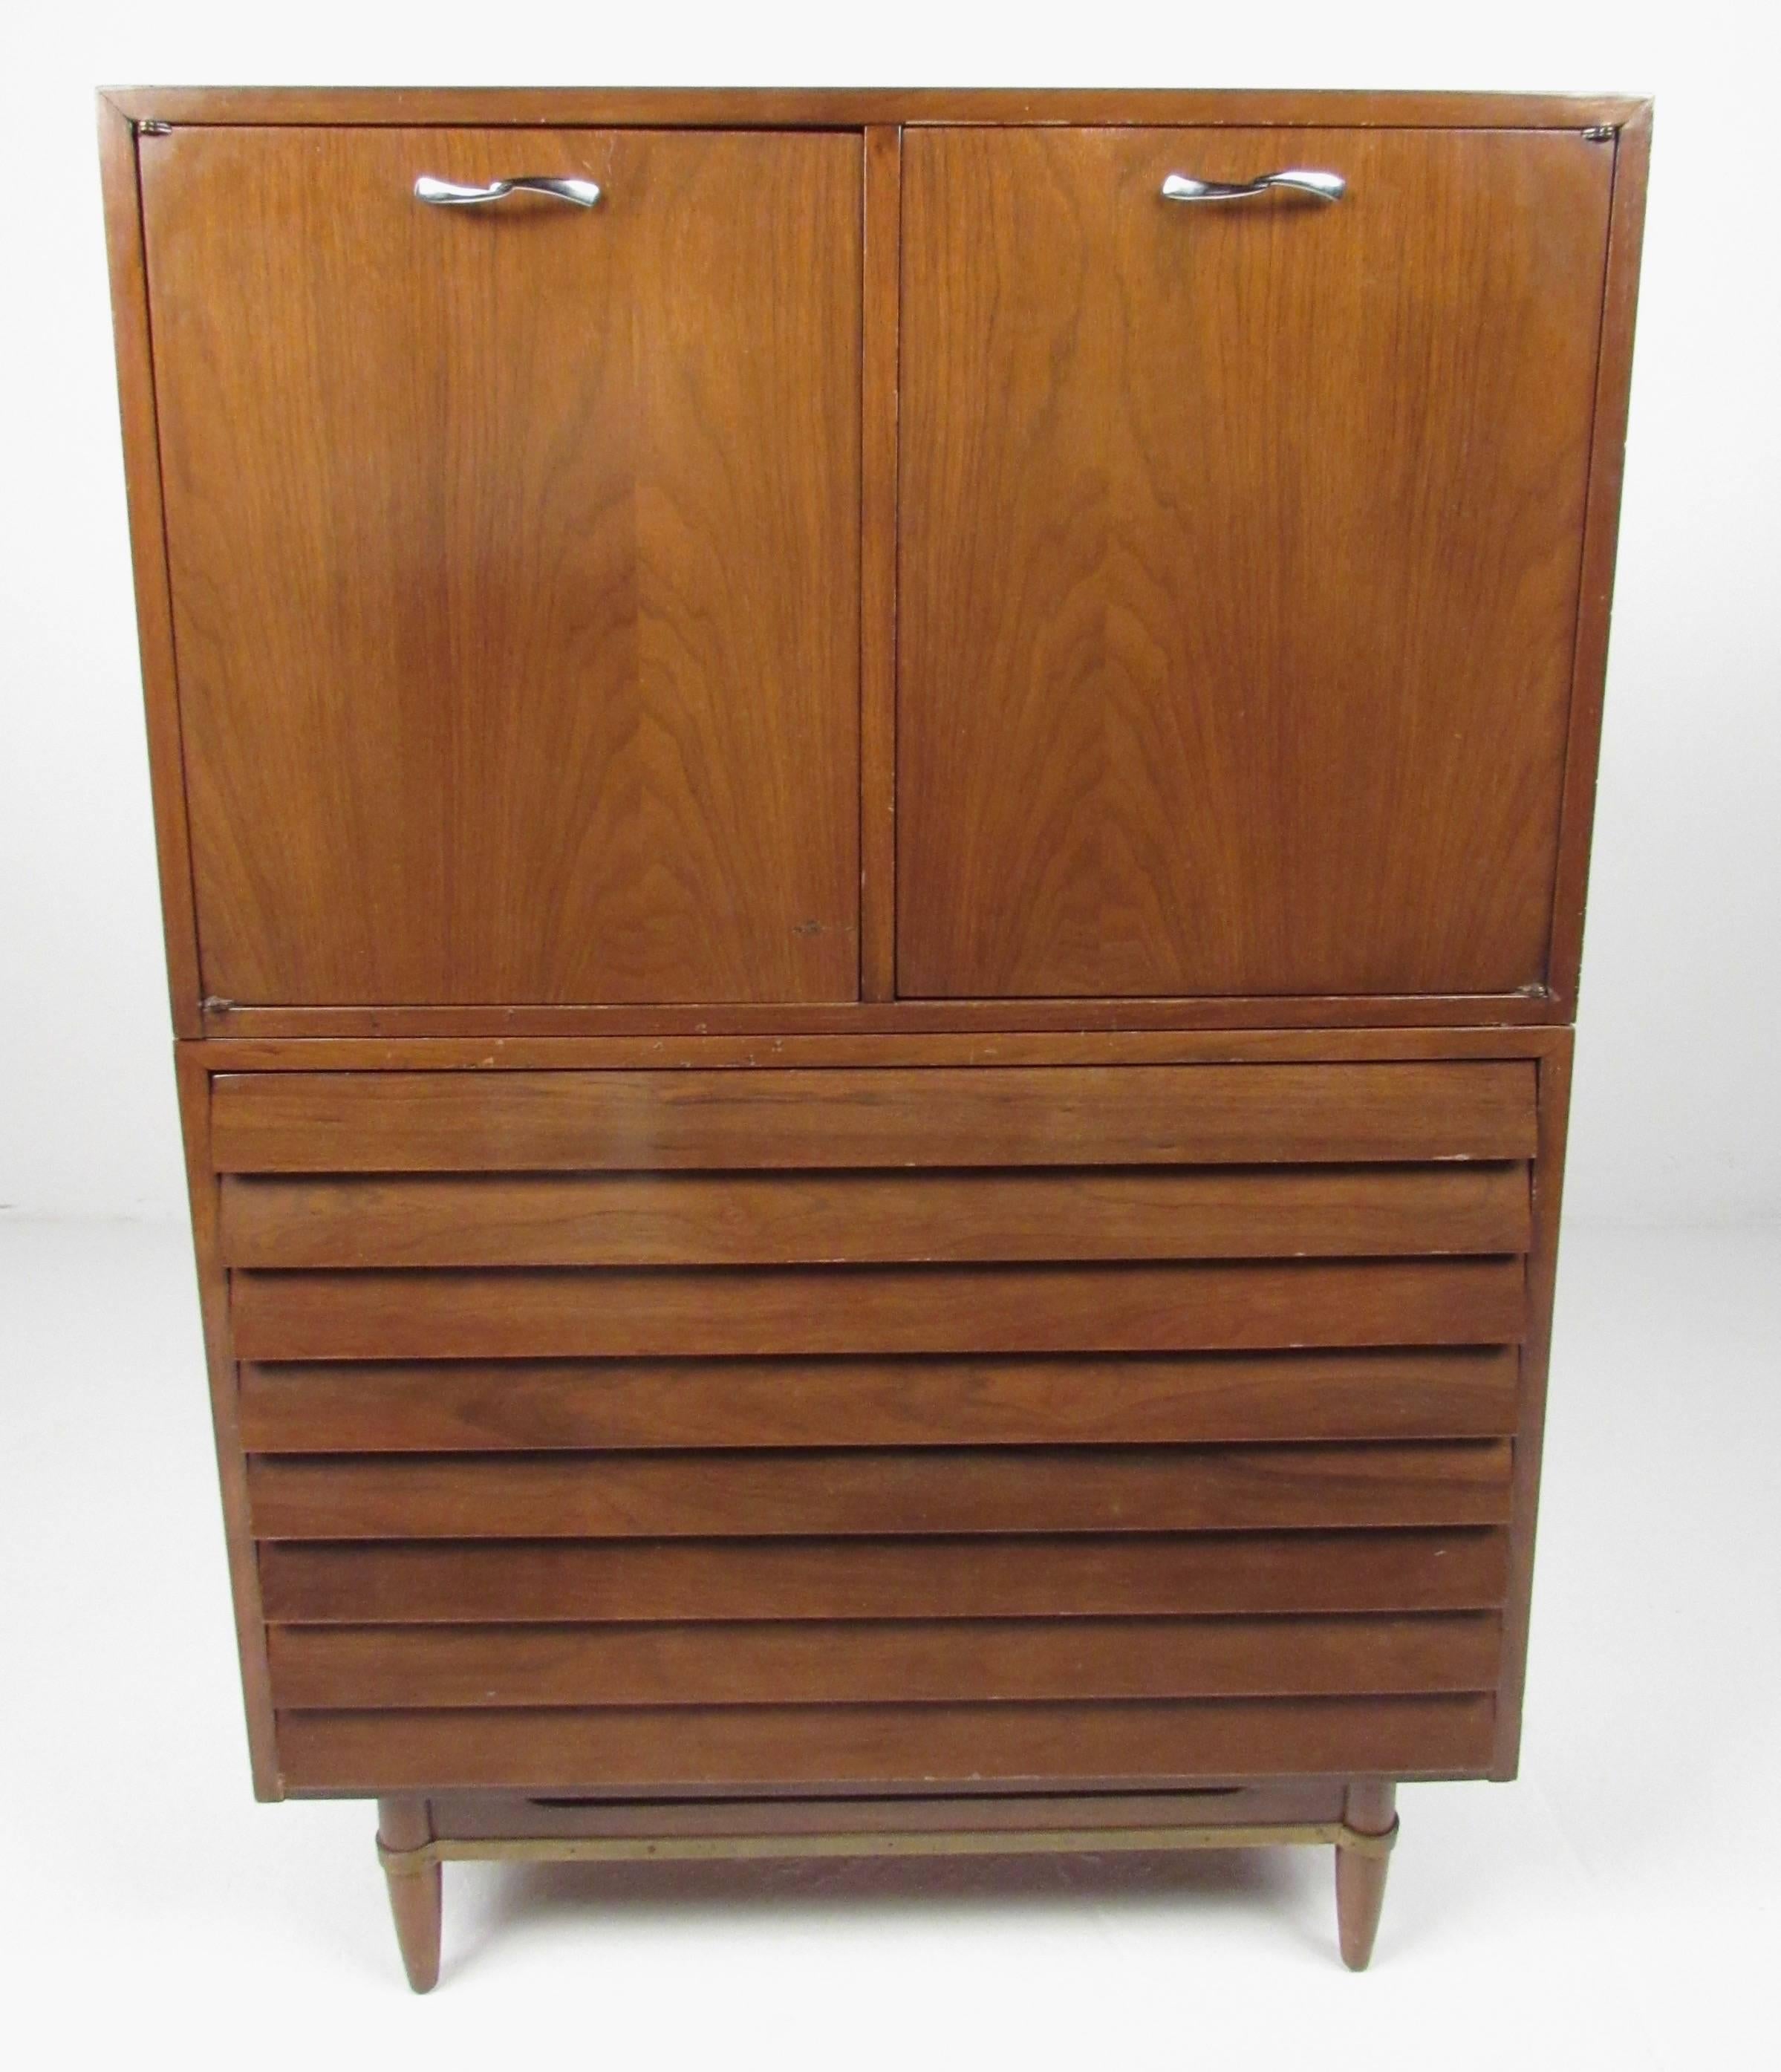 This vintage walnut dresser features two stacking cabinets with a mix of shelf and drawer storage. Mid-Century manufacturer American of Martinsville crafted this stylish highboy dresser with louvered front drawers, unique brass stretcher trim, and